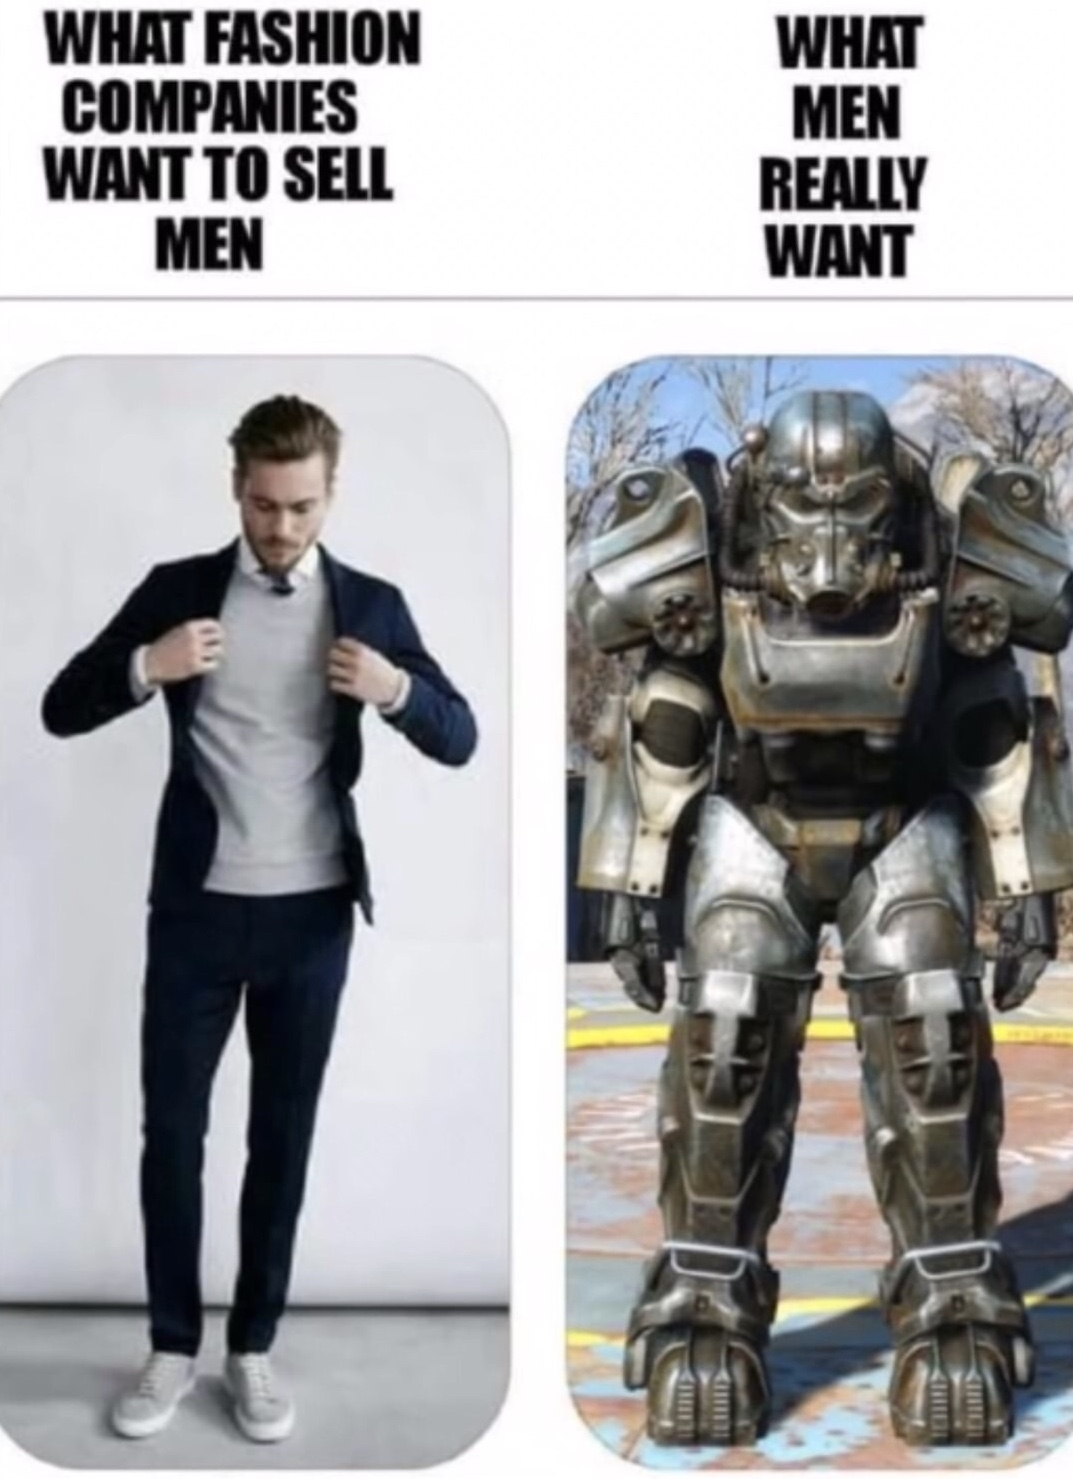 fallout memes - What Fashion Companies Want To Sell Men What Men Really Want